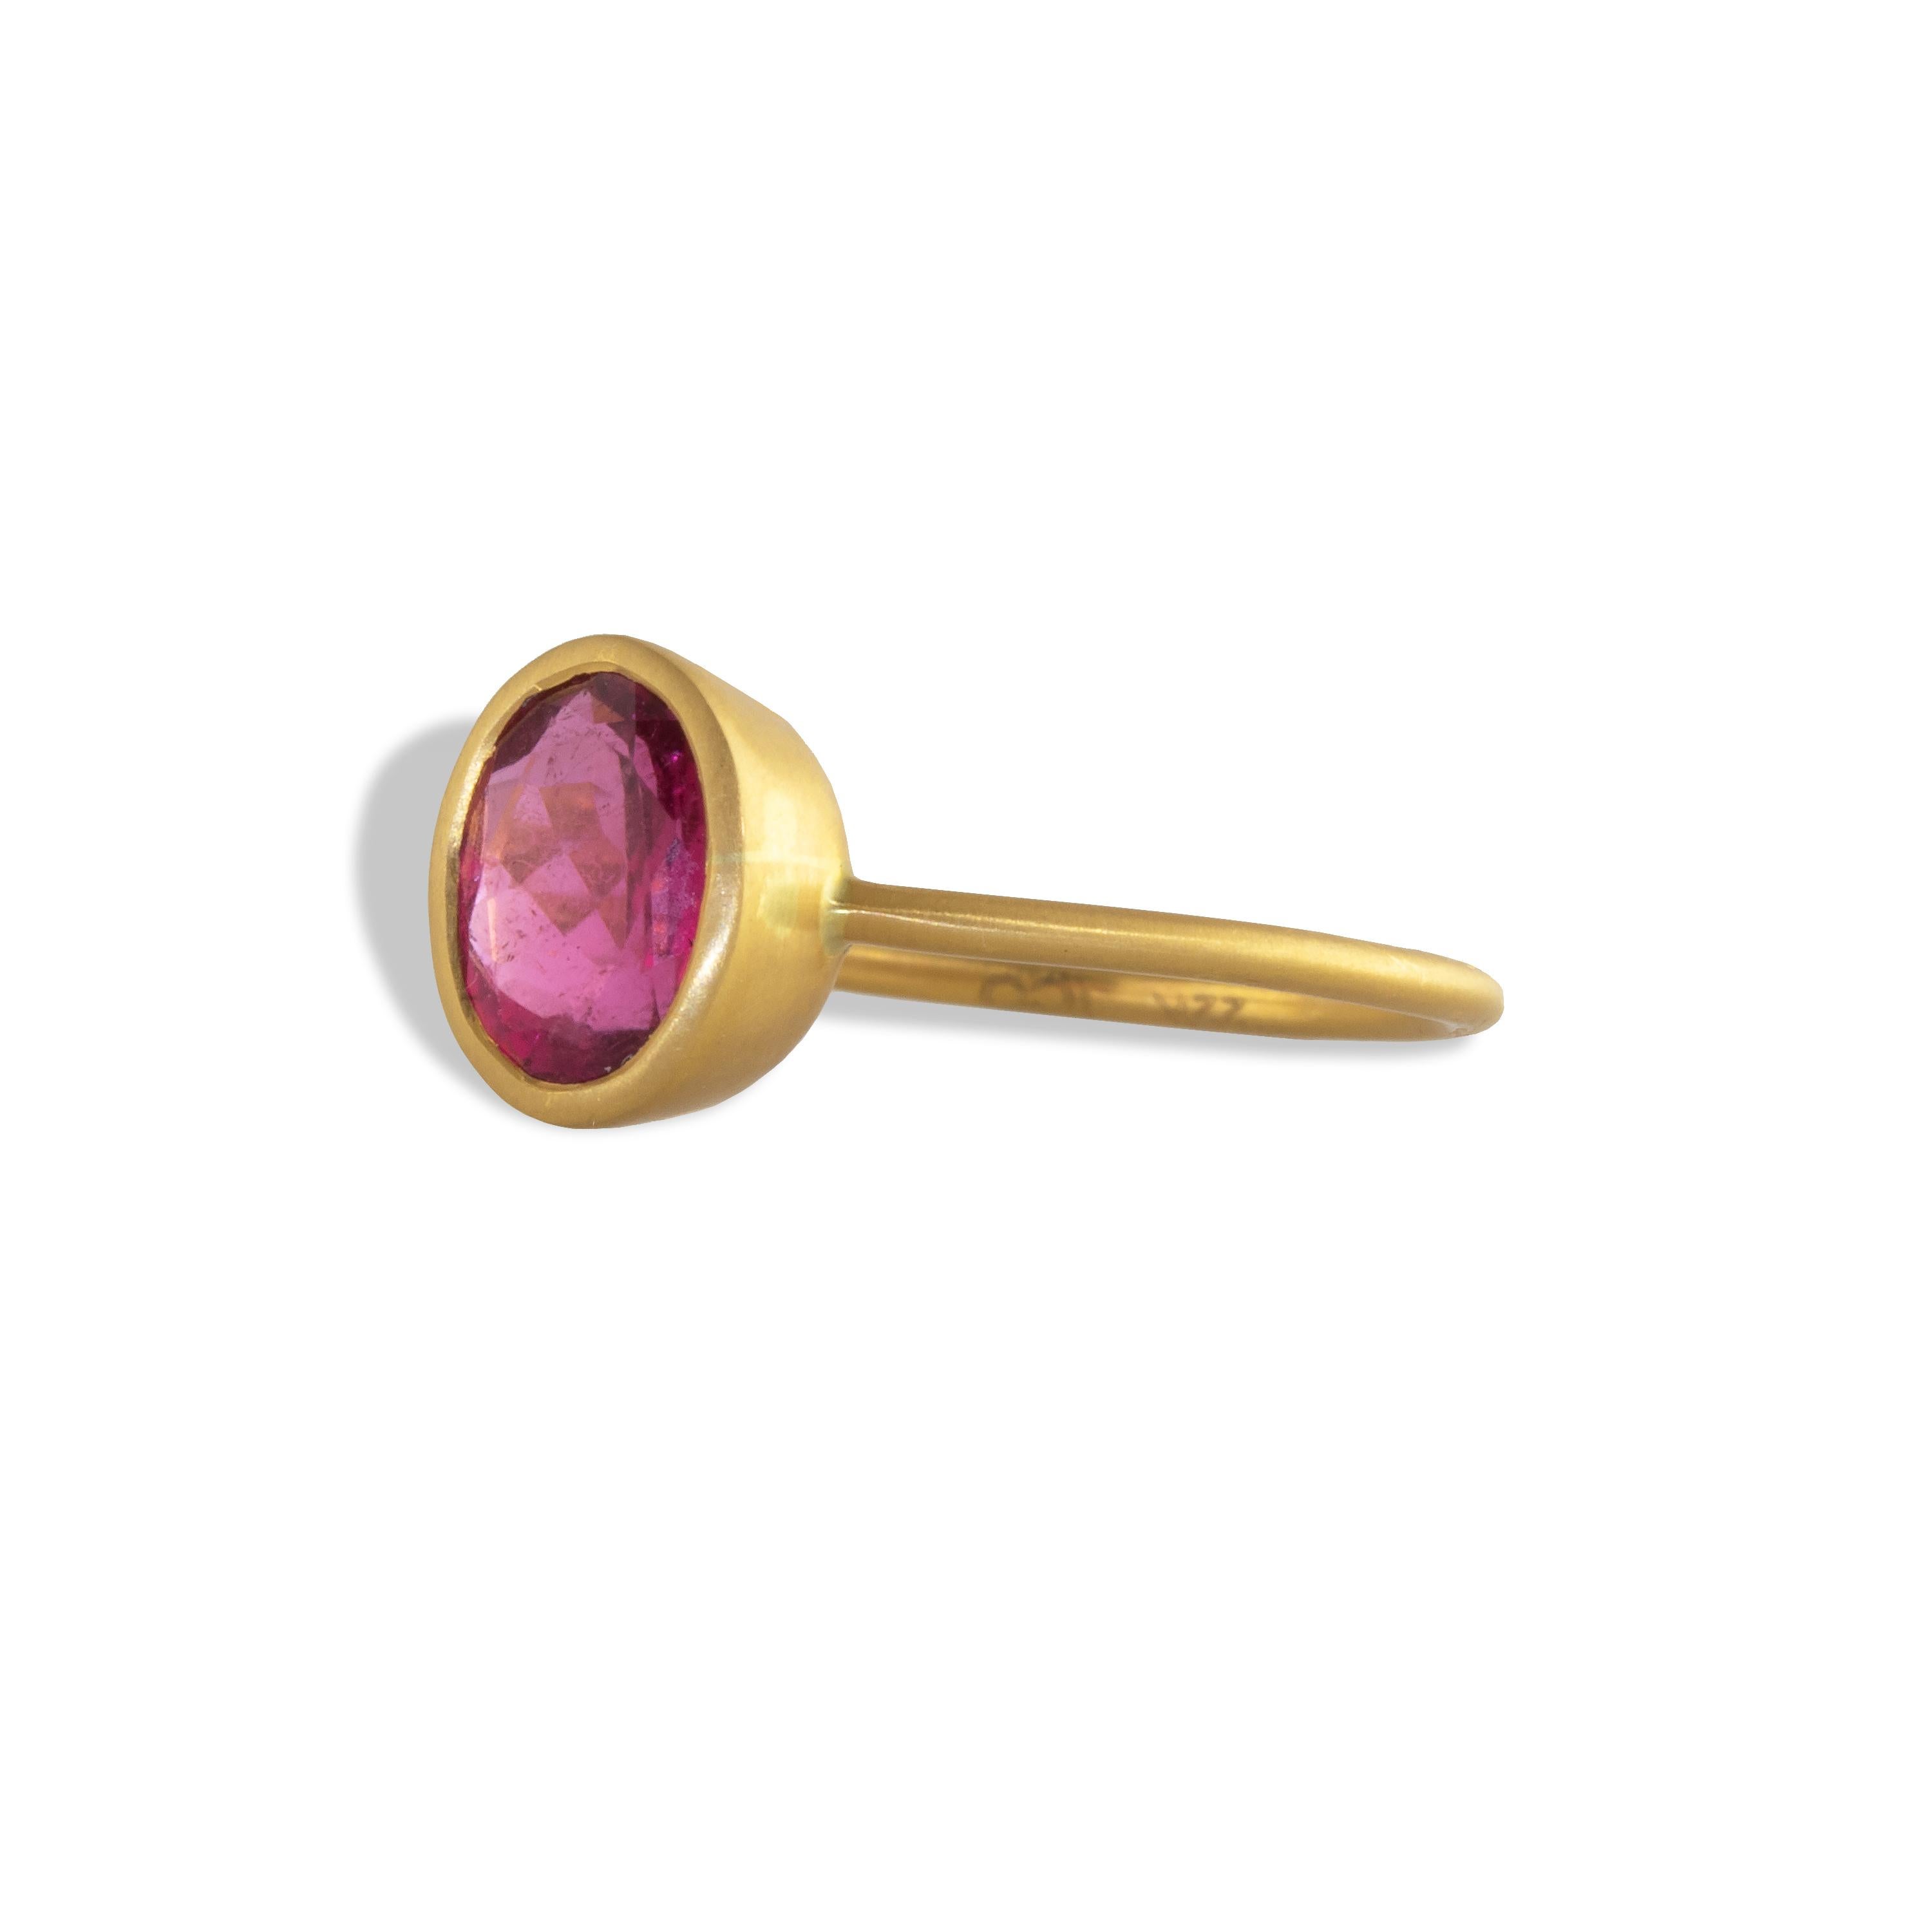 Contemporary Ico & the Bird Fine Jewelry 1.34 carat Red Spinel Gold Ring For Sale